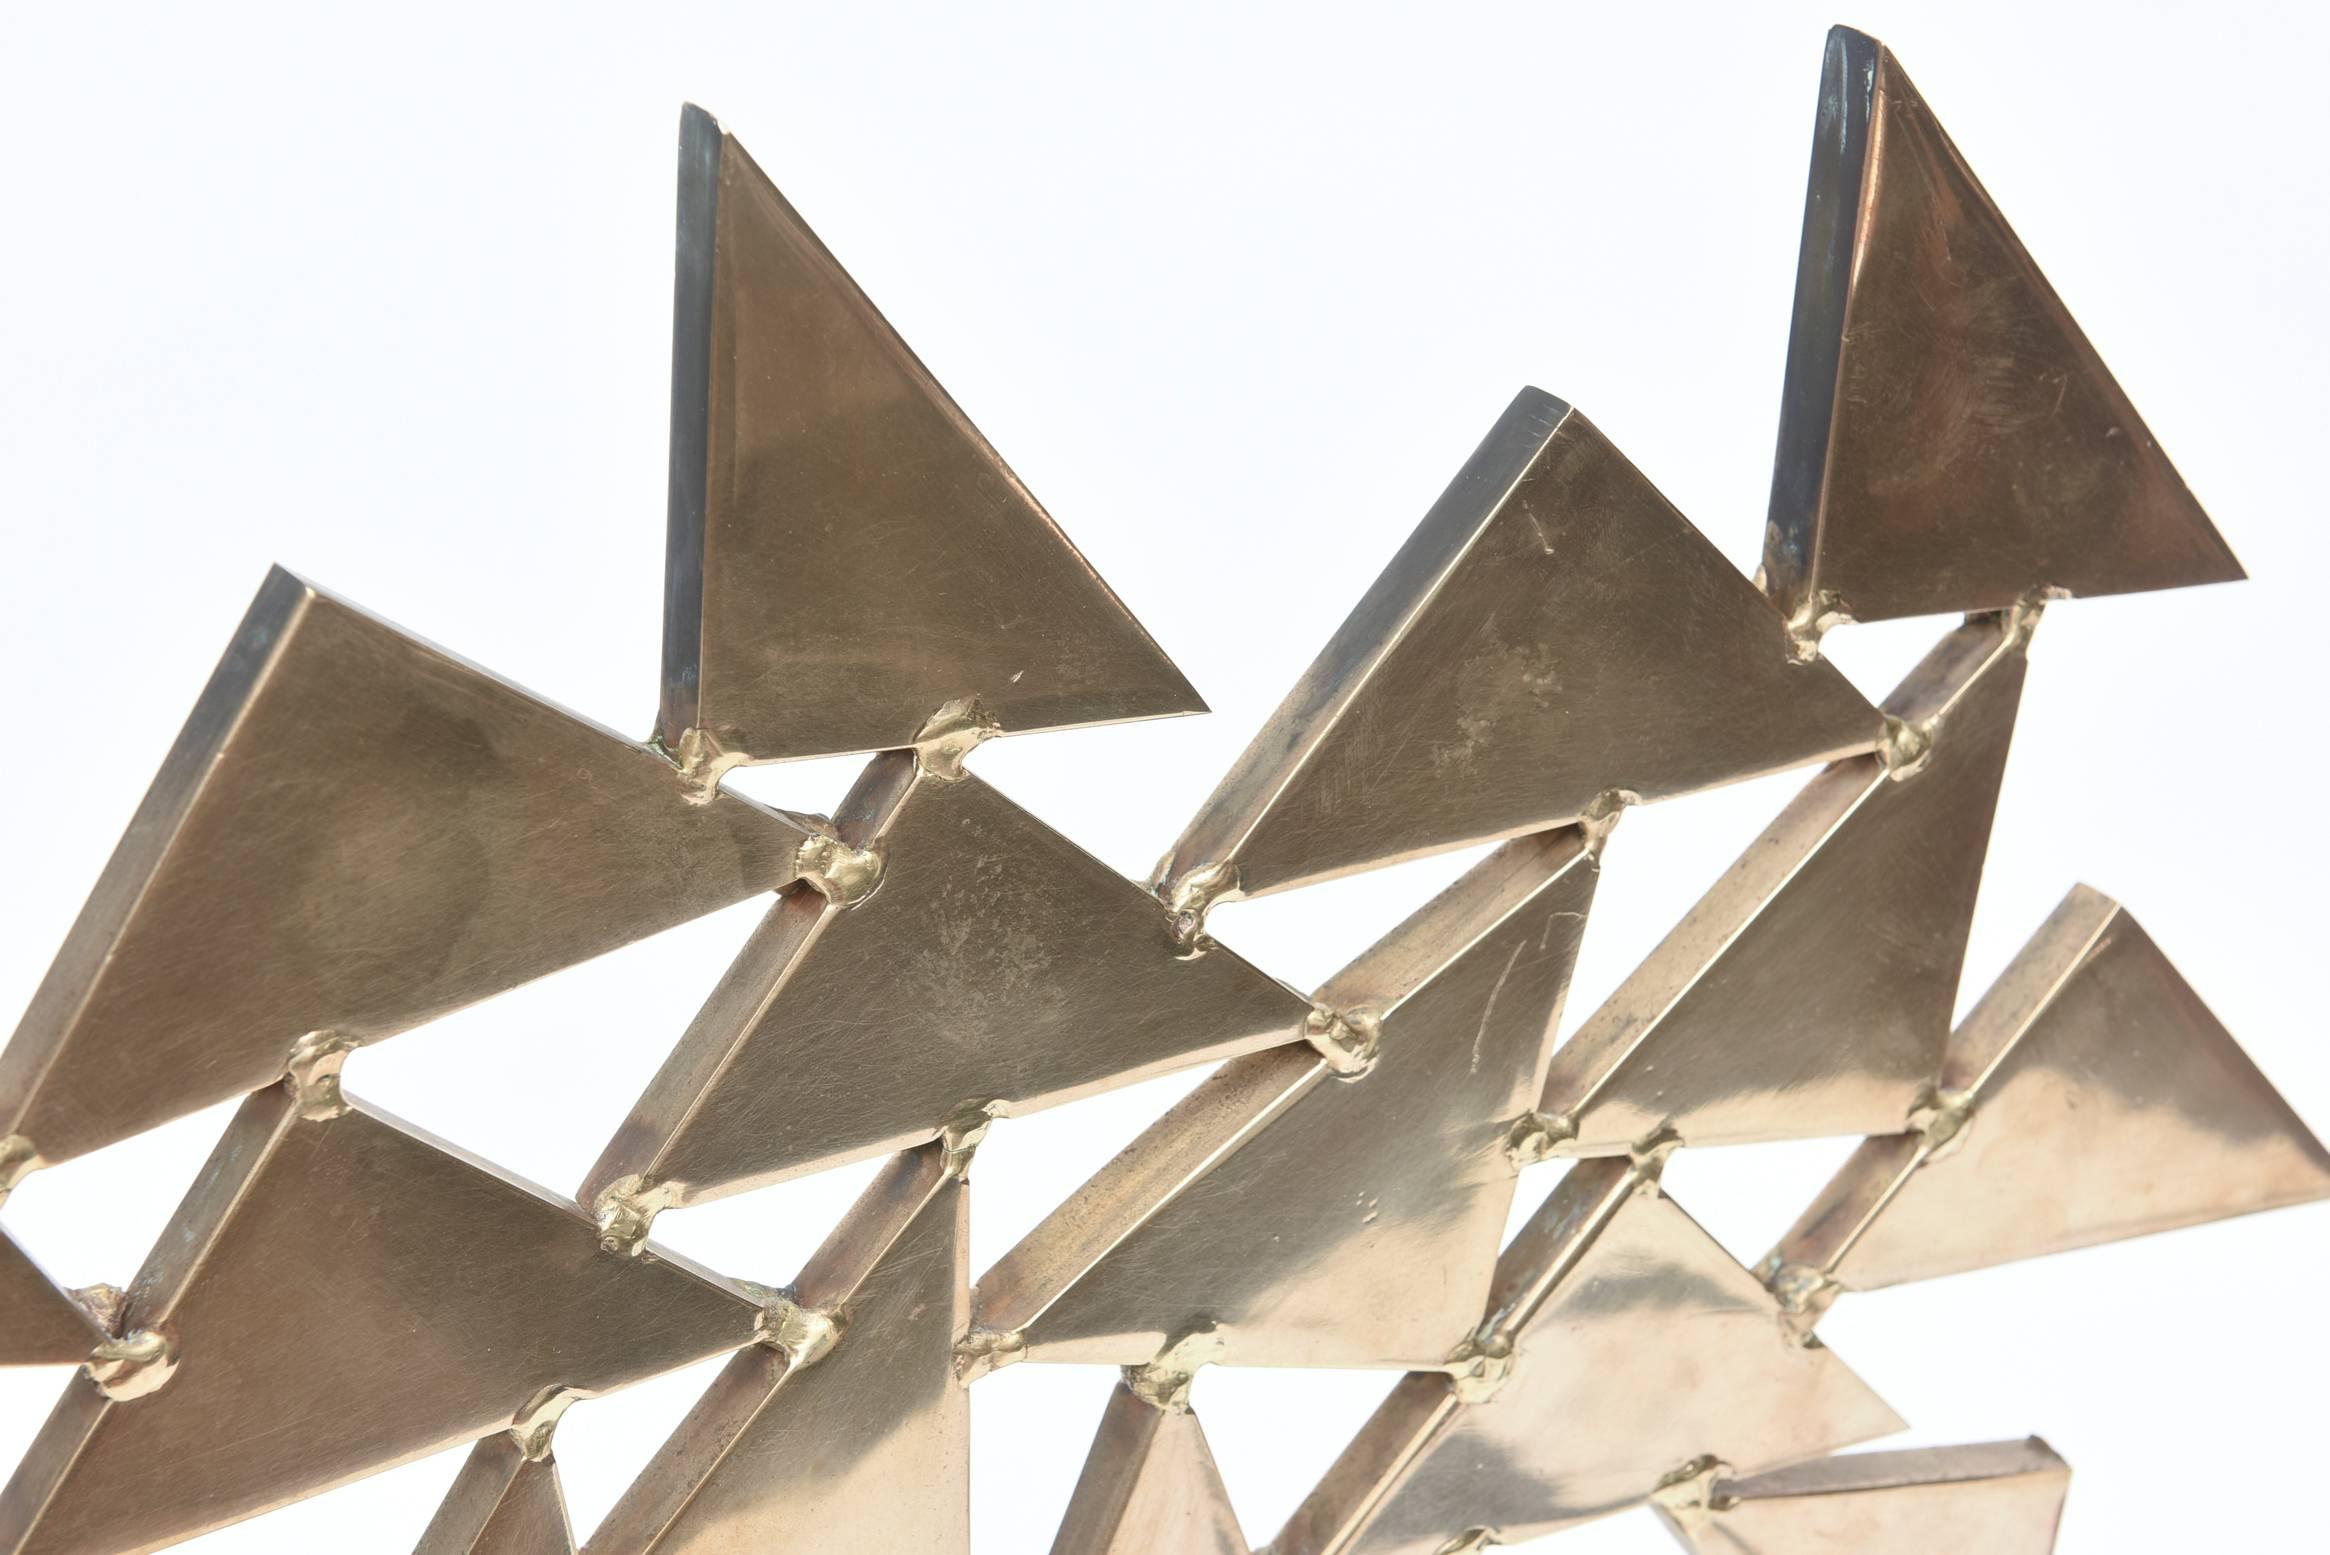 This French two-part fantastic large and arresting solid brass abstract sculpture has connected and welded triangles that give it dimension and form. It has great geometric lines of triangles and has great weight to it. It is one of a kind and from